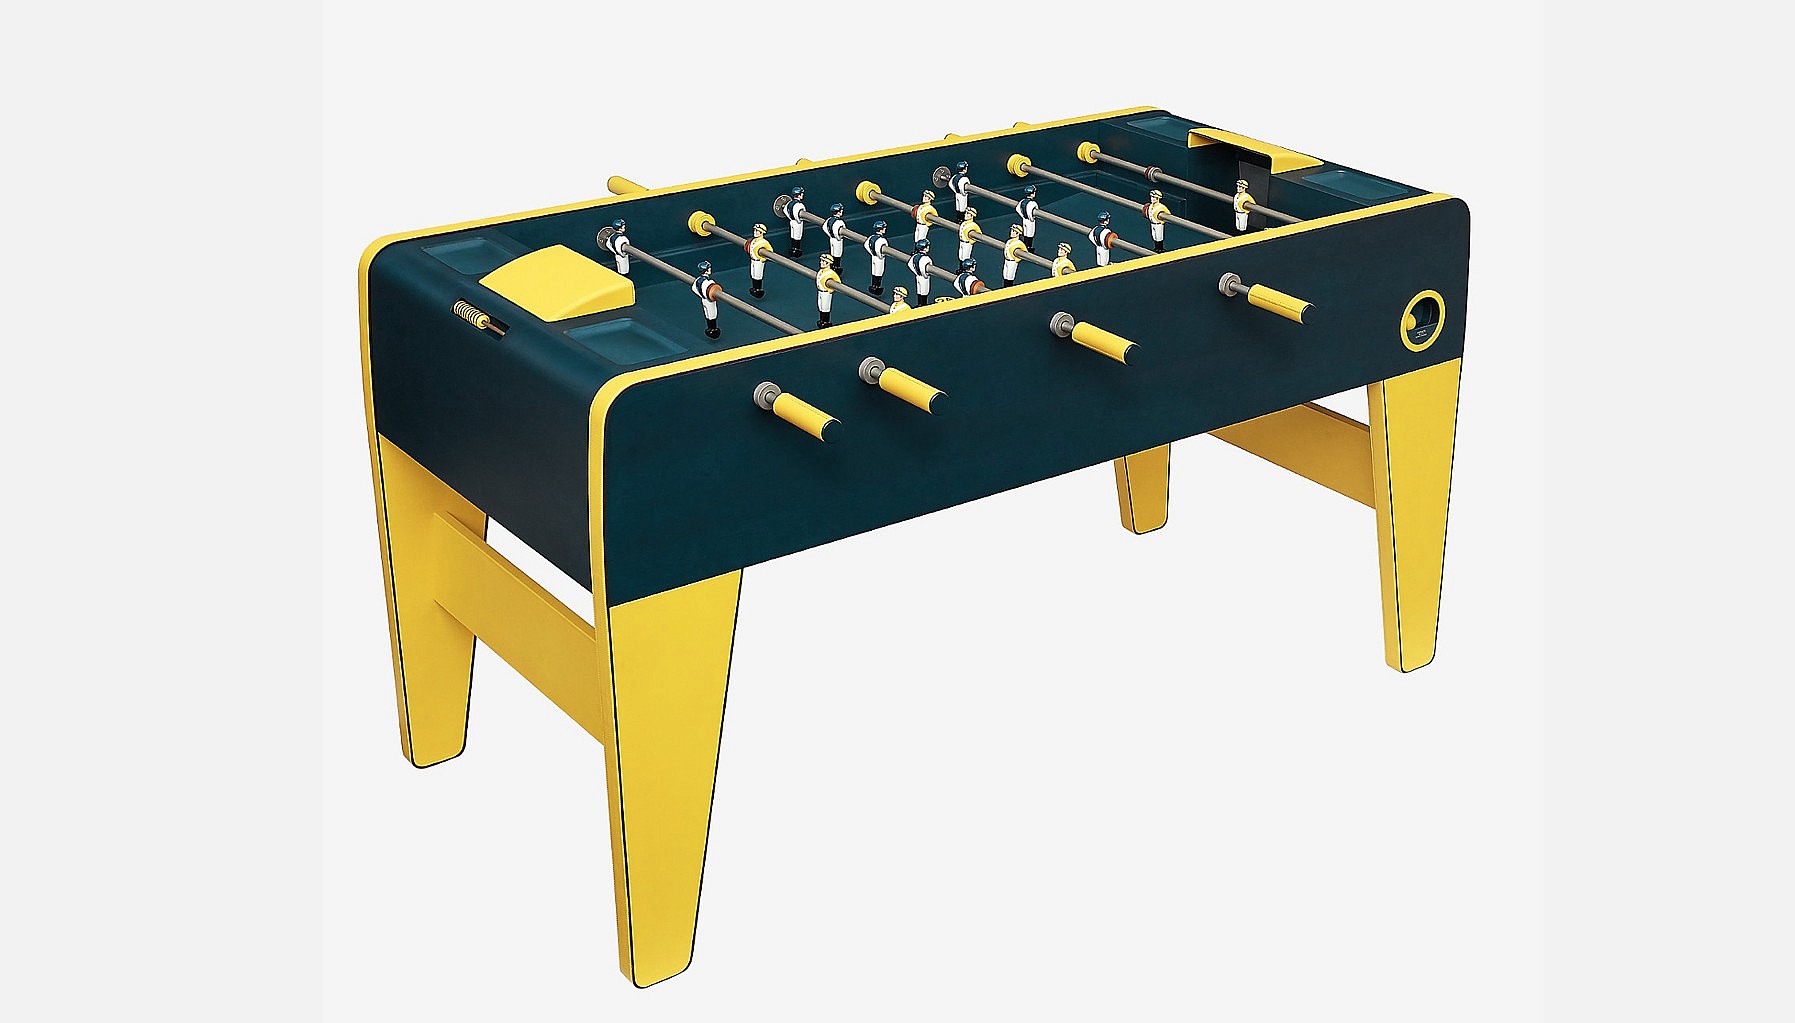 Hermes Foosball Table, You Can Be The Next Neymar